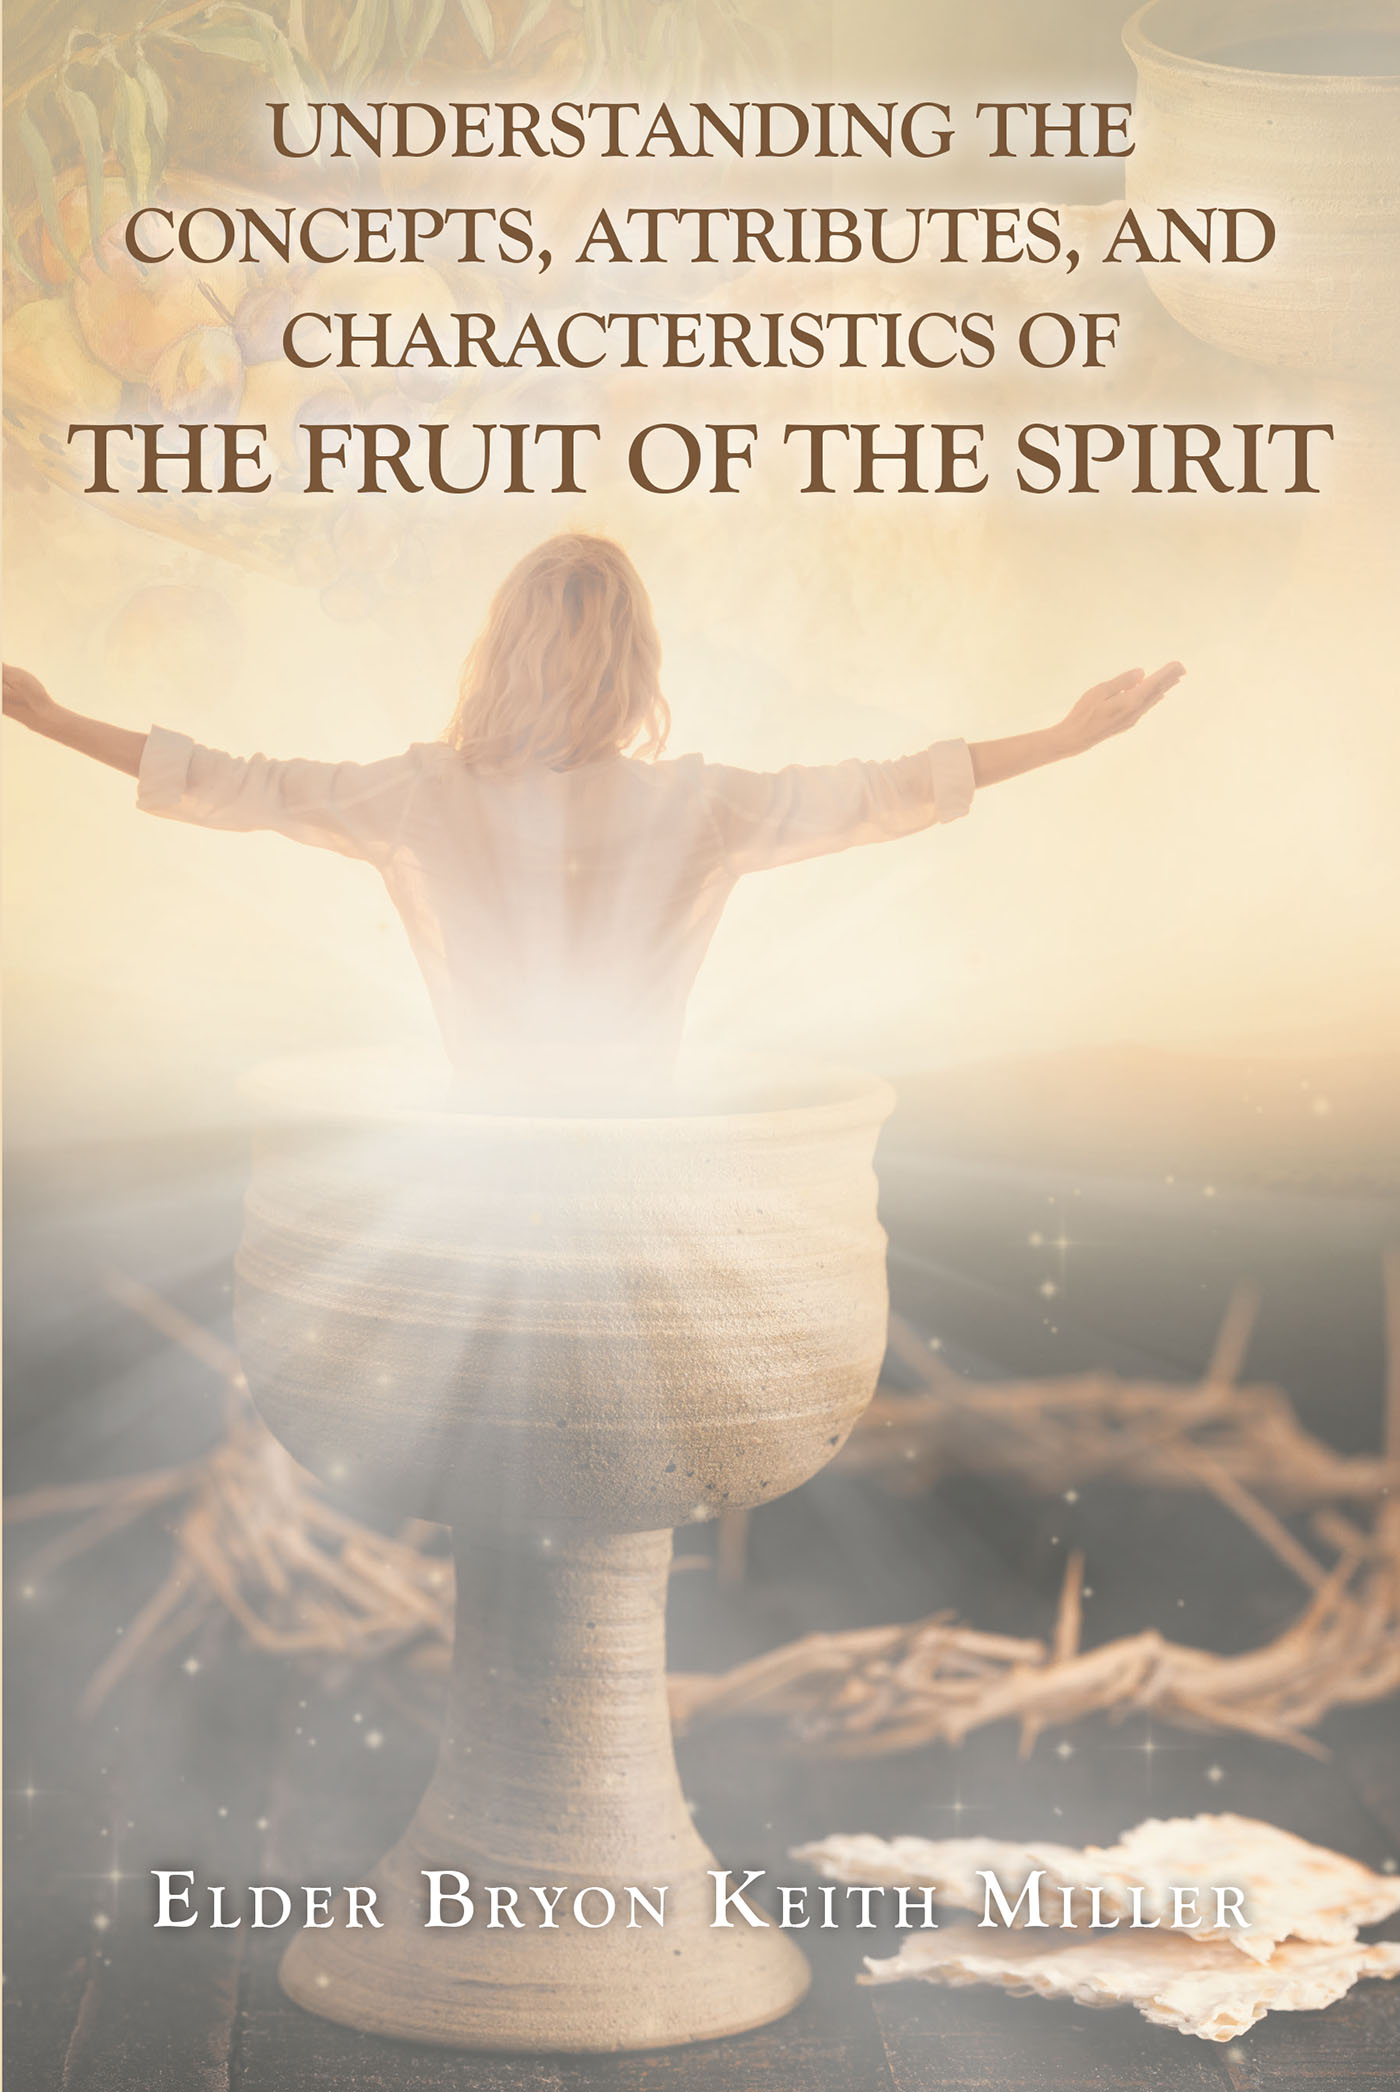 Elder Bryon Keith Miller’s Newly Released "Understanding the Concepts, Attributes, and Characteristics of the Fruit of the Spirit" is a Helpful Guide to Living Faithfully